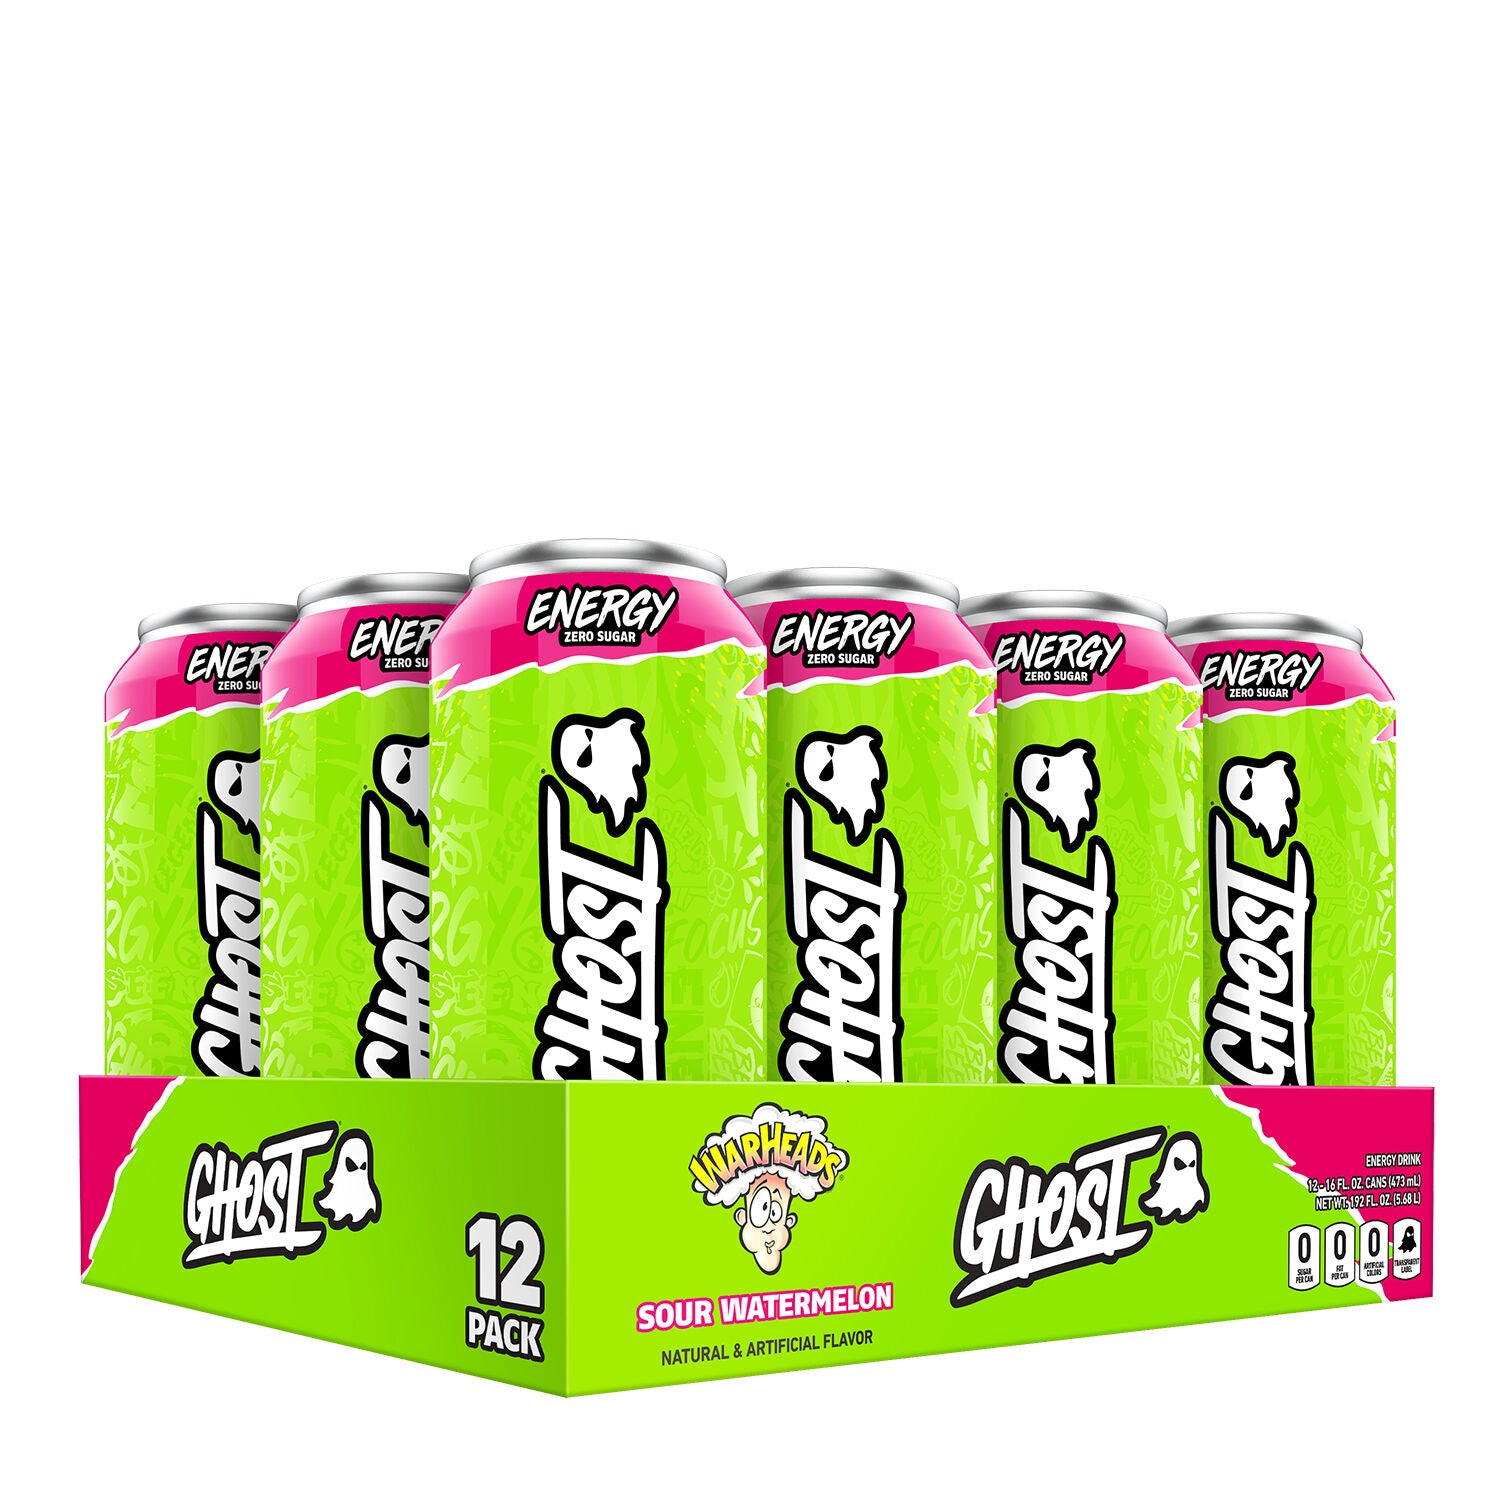 GHOST Energy Drink (1 case of 12 cans) Protein Snacks Sour Watermelon Warheads GHOST